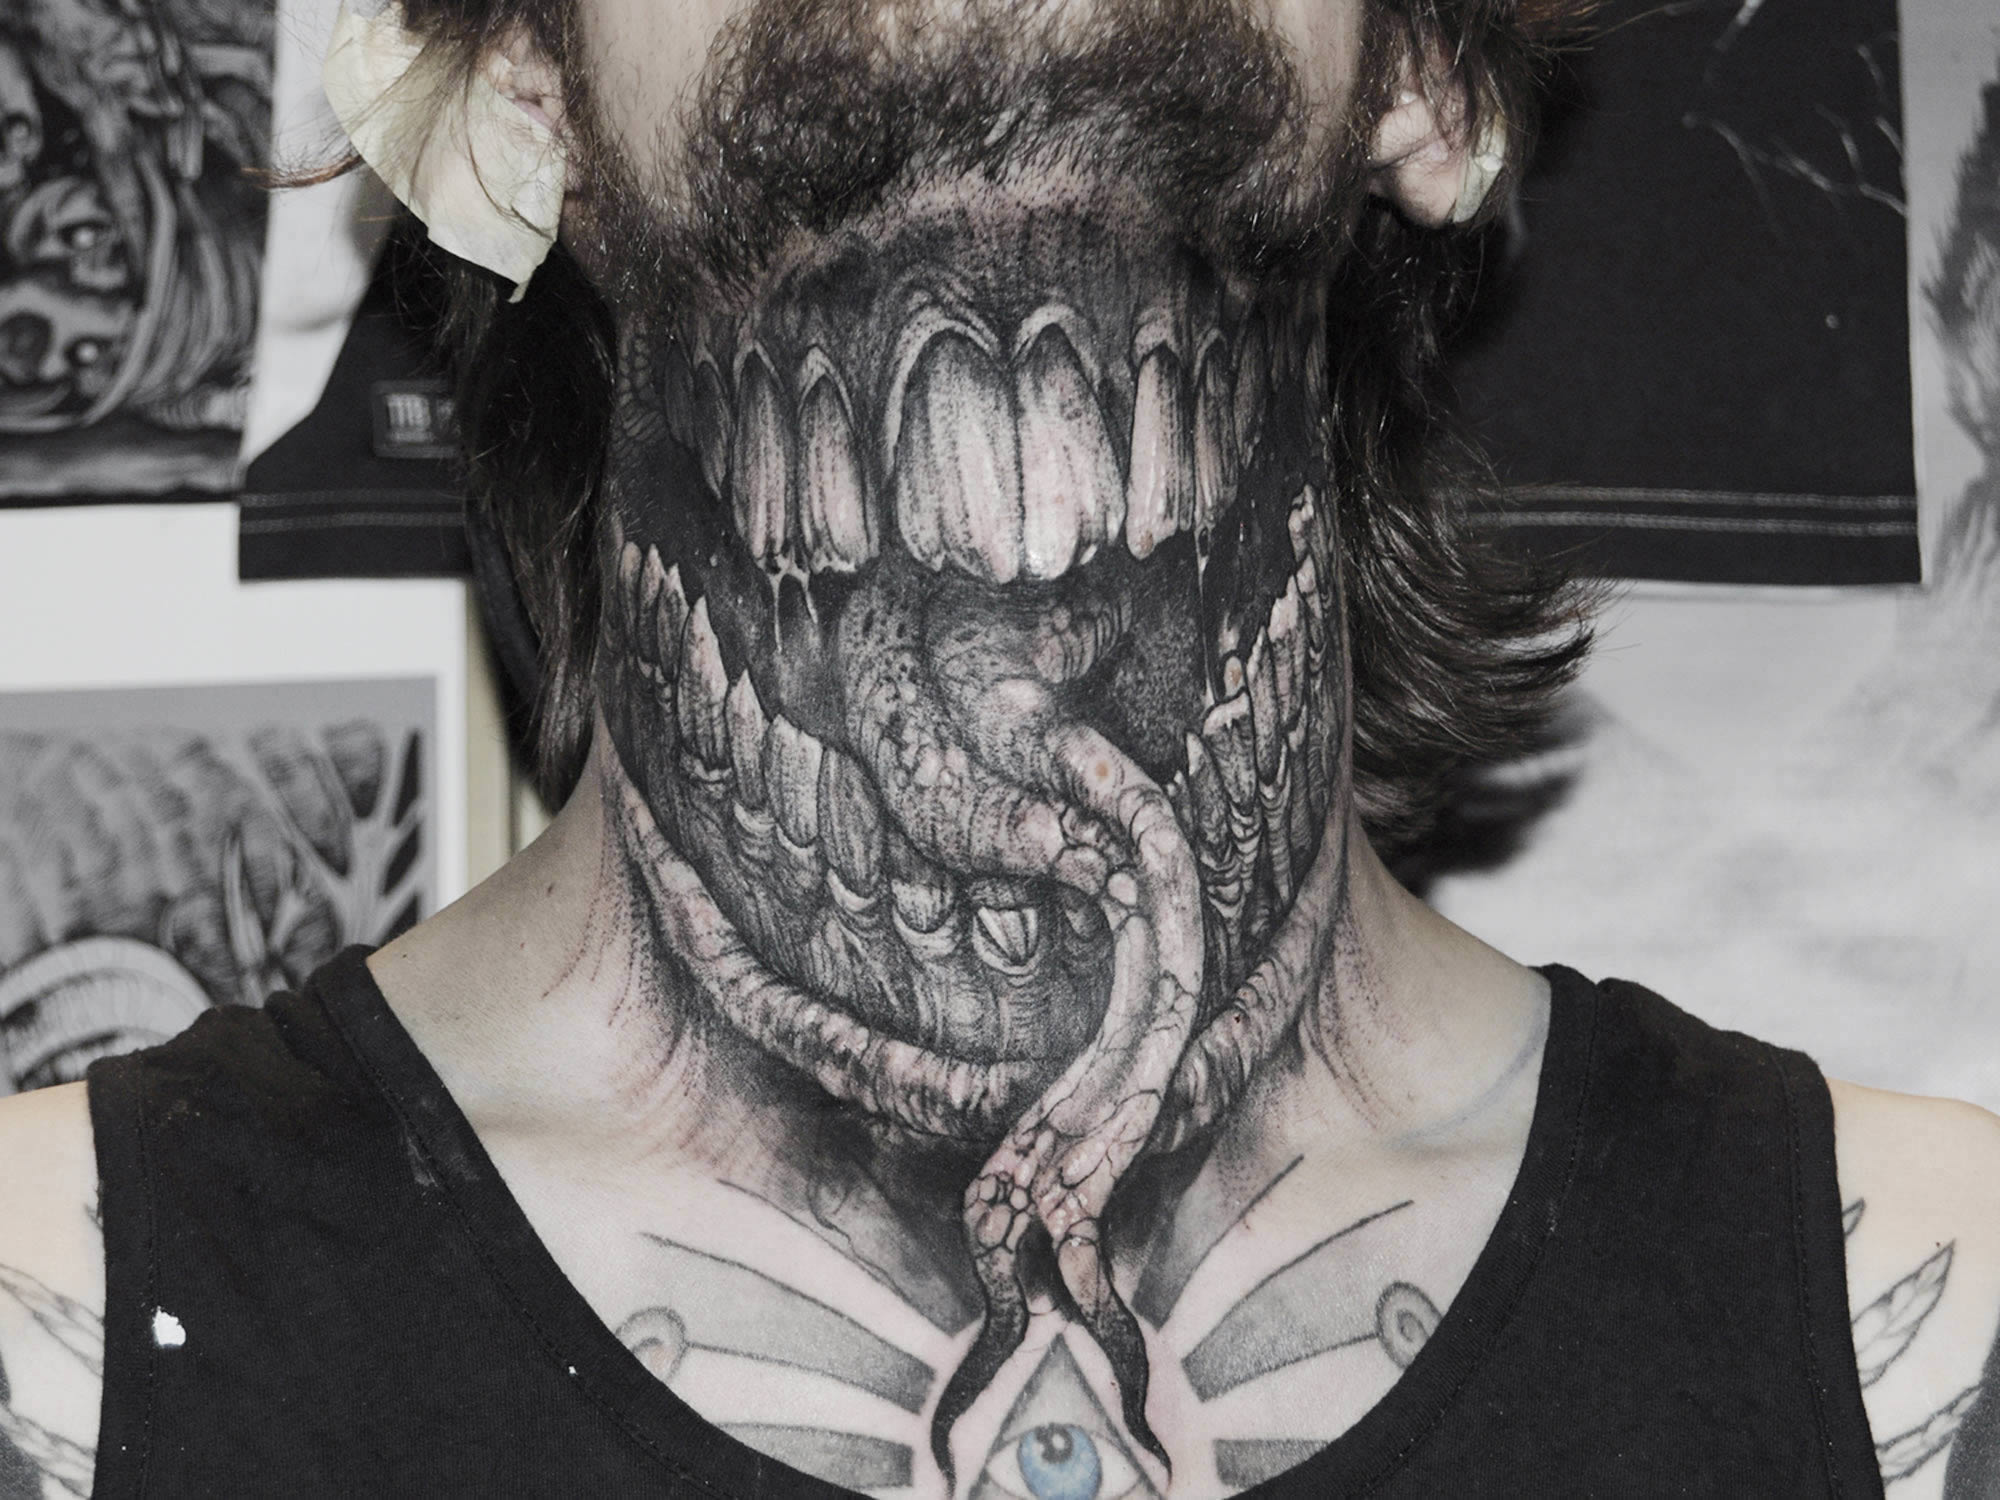 Robert Borbas, throat tattoo - snake-tongued mouth